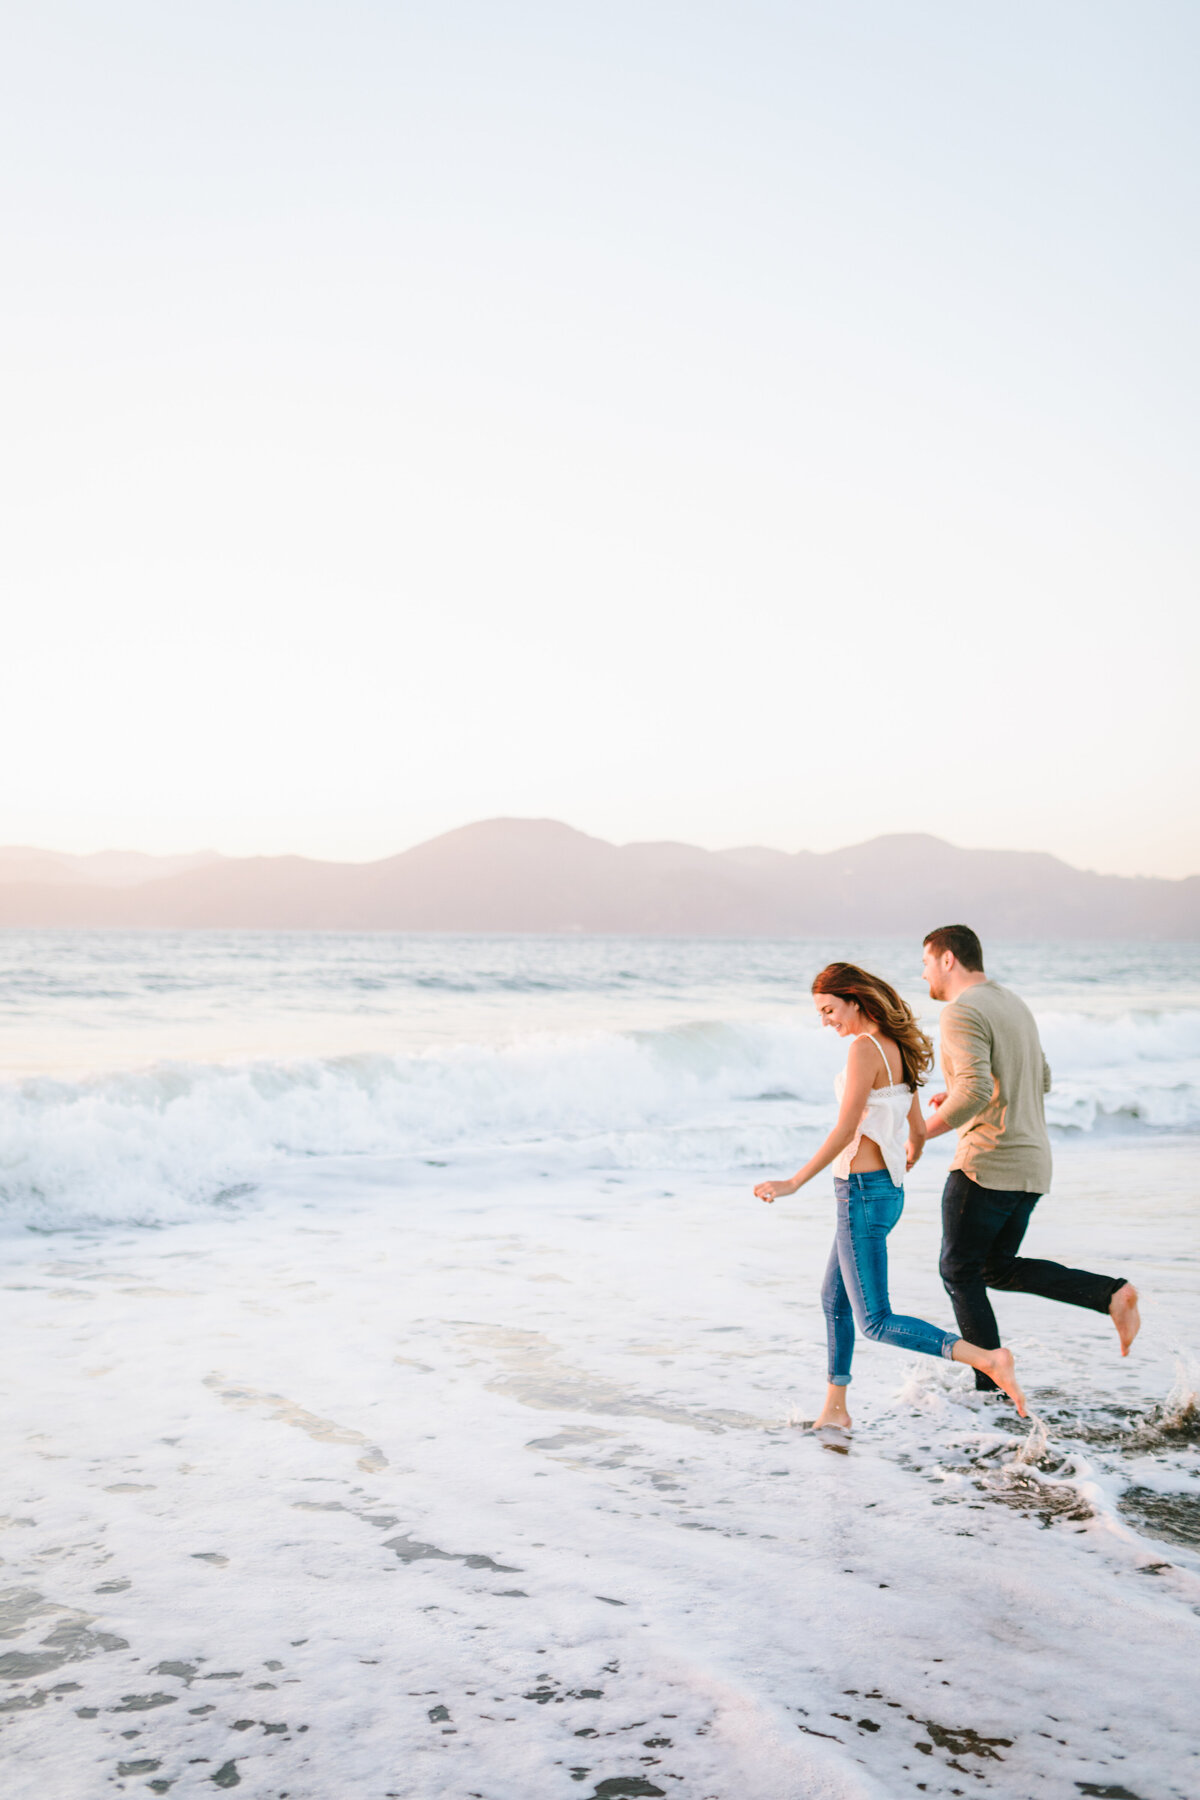 Best California and Texas Engagement Photographer-Jodee Debes Photography-82